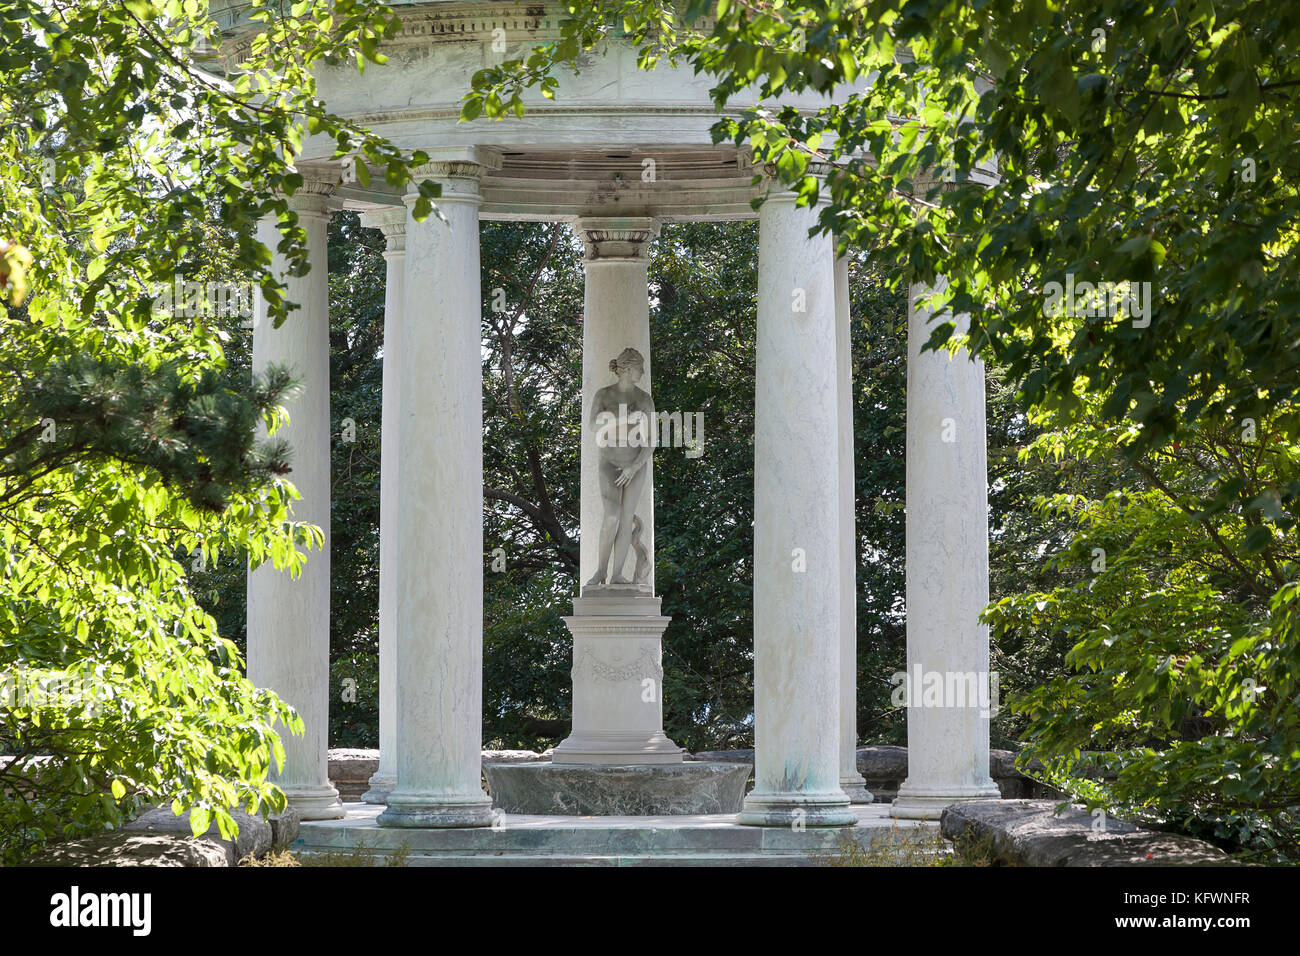 Classic Temple of Aphrodite with marble statue on the Kykuit estate of John D. Rockefeller in Pocantico Hills, Sleepy Hollow, Westchester, NY. Stock Photo